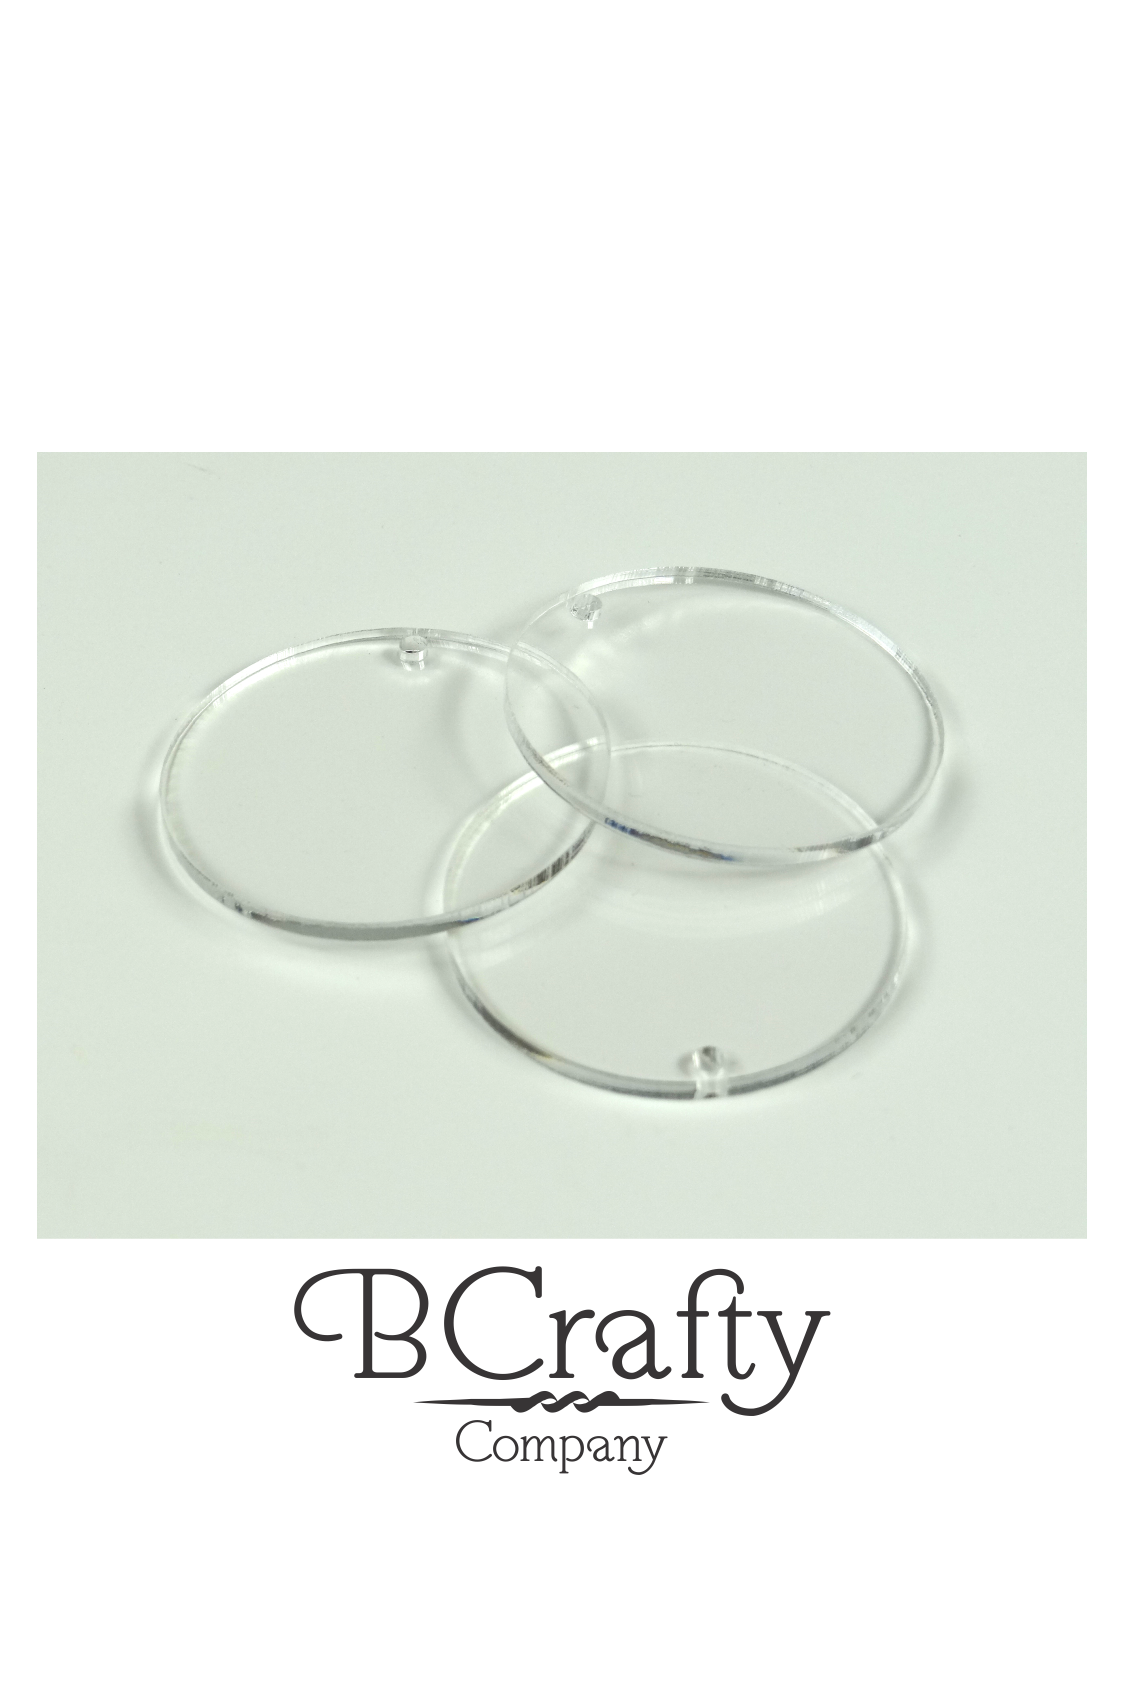 Sublimation Acrylic Circle Blanks, 6 Inch Round Discs for